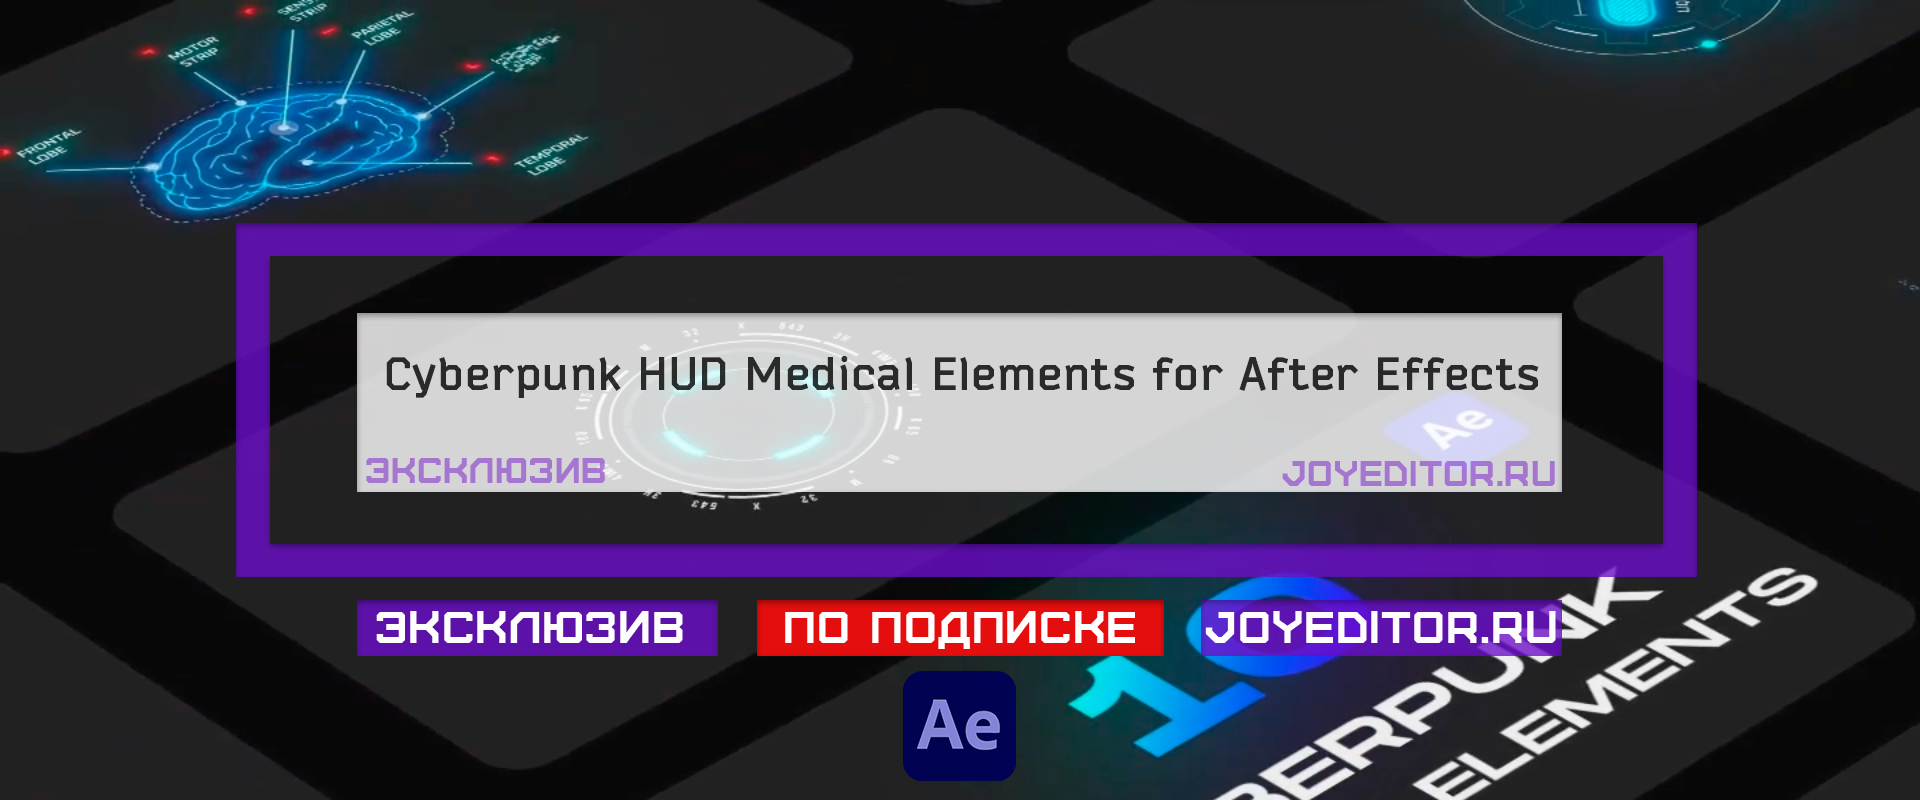 Cyberpunk hud elements for after effects torrent